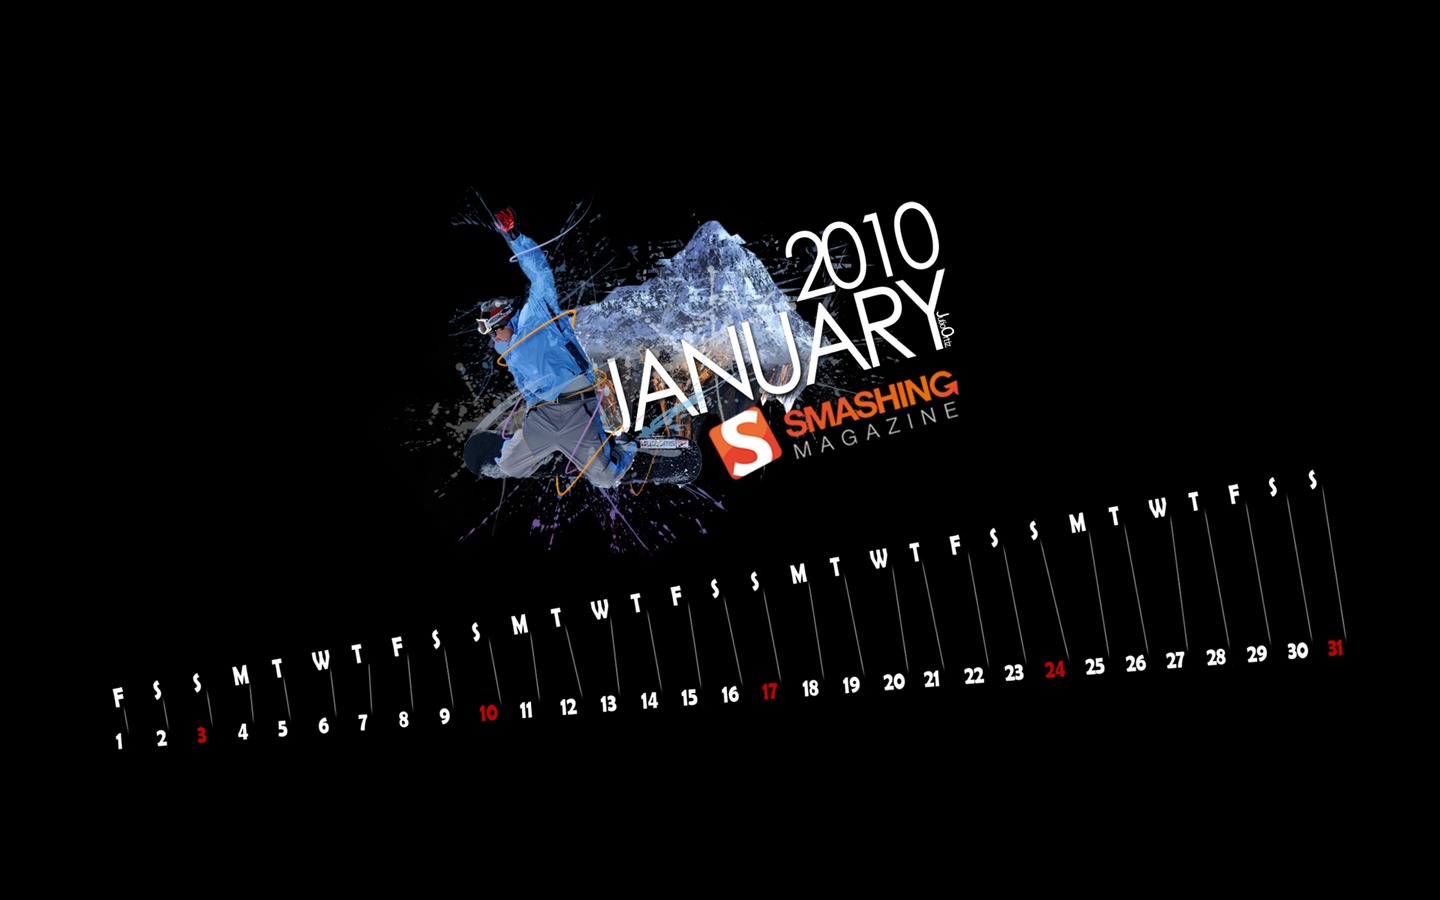 Microsoft Official Win7 New Year Wallpapers #9 - 1440x900